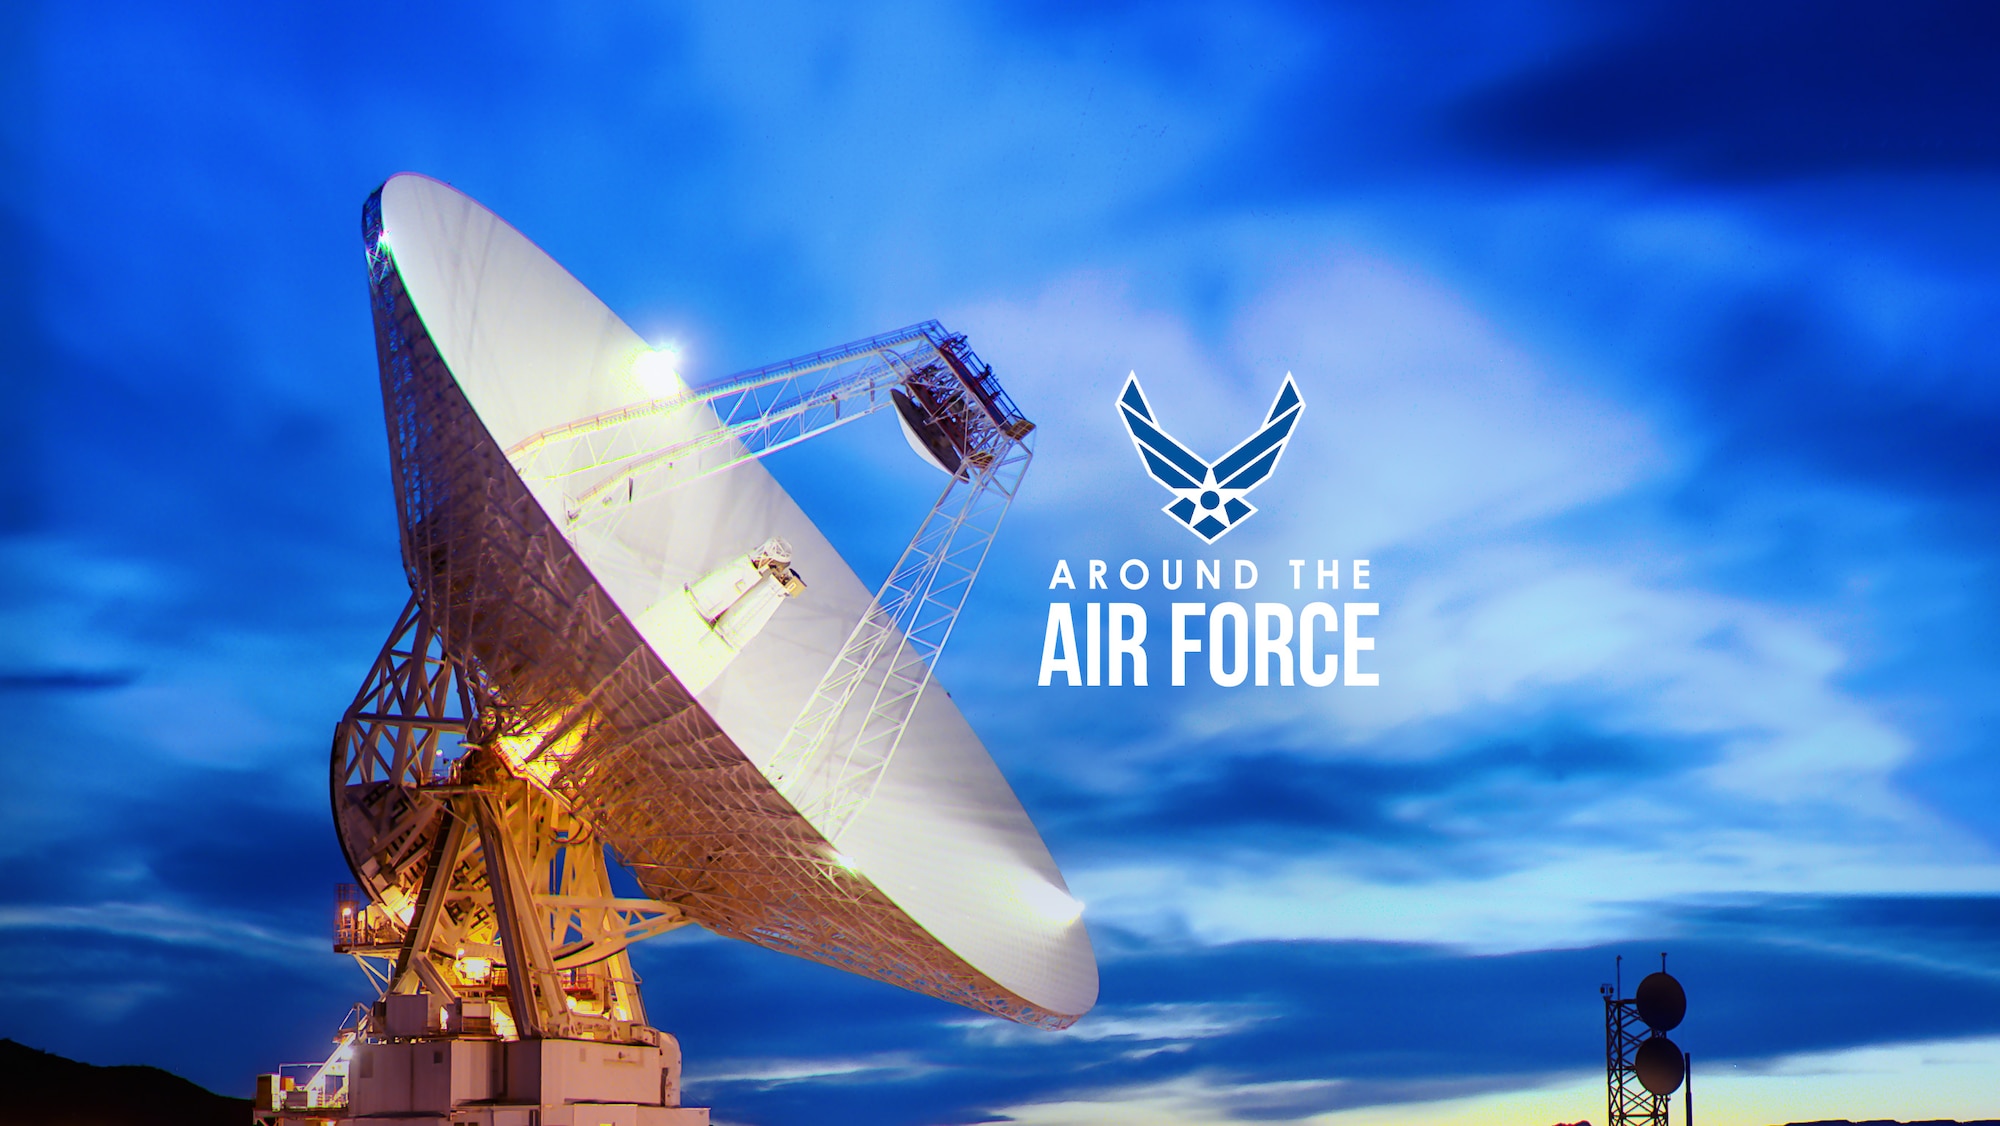 In this week’s look around the Air Force, the new Student Success Center fosters academic achievement for Airmen and Guardians, two incentives aim to retain active-duty aviators and rated officers, and a trilateral initiative advances the Space Force’s radar capability for deep space. (Hosted by Tech. Sgt. Vernon Young)